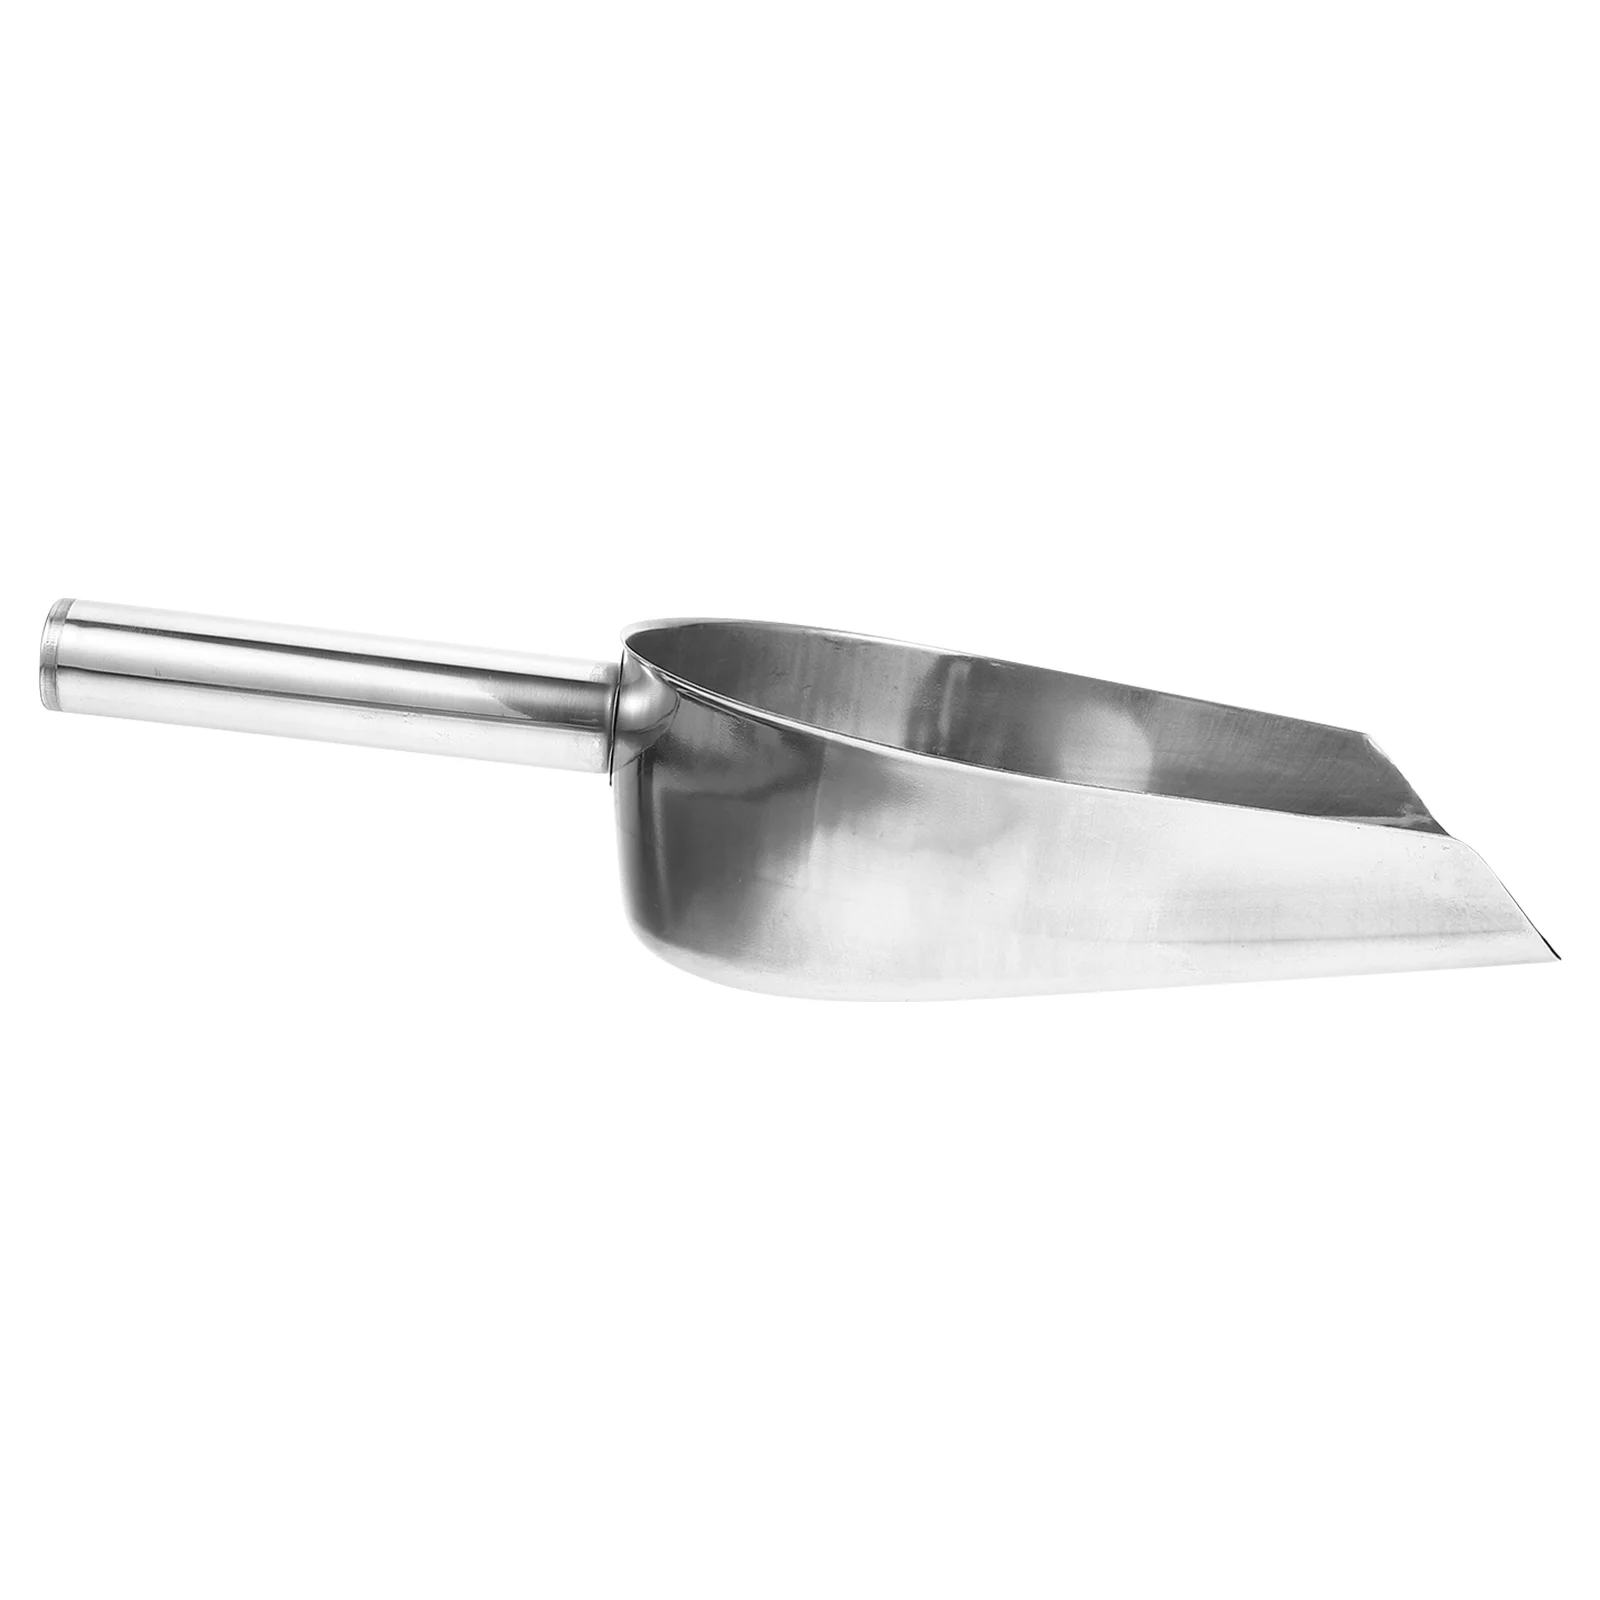 

Scoop Ice Food Metal Scoops Scooper Flour Stainless Steel Cube Coffee Popcorn Rice Utility Kitchen Candy Bar Pet Dry Sugar